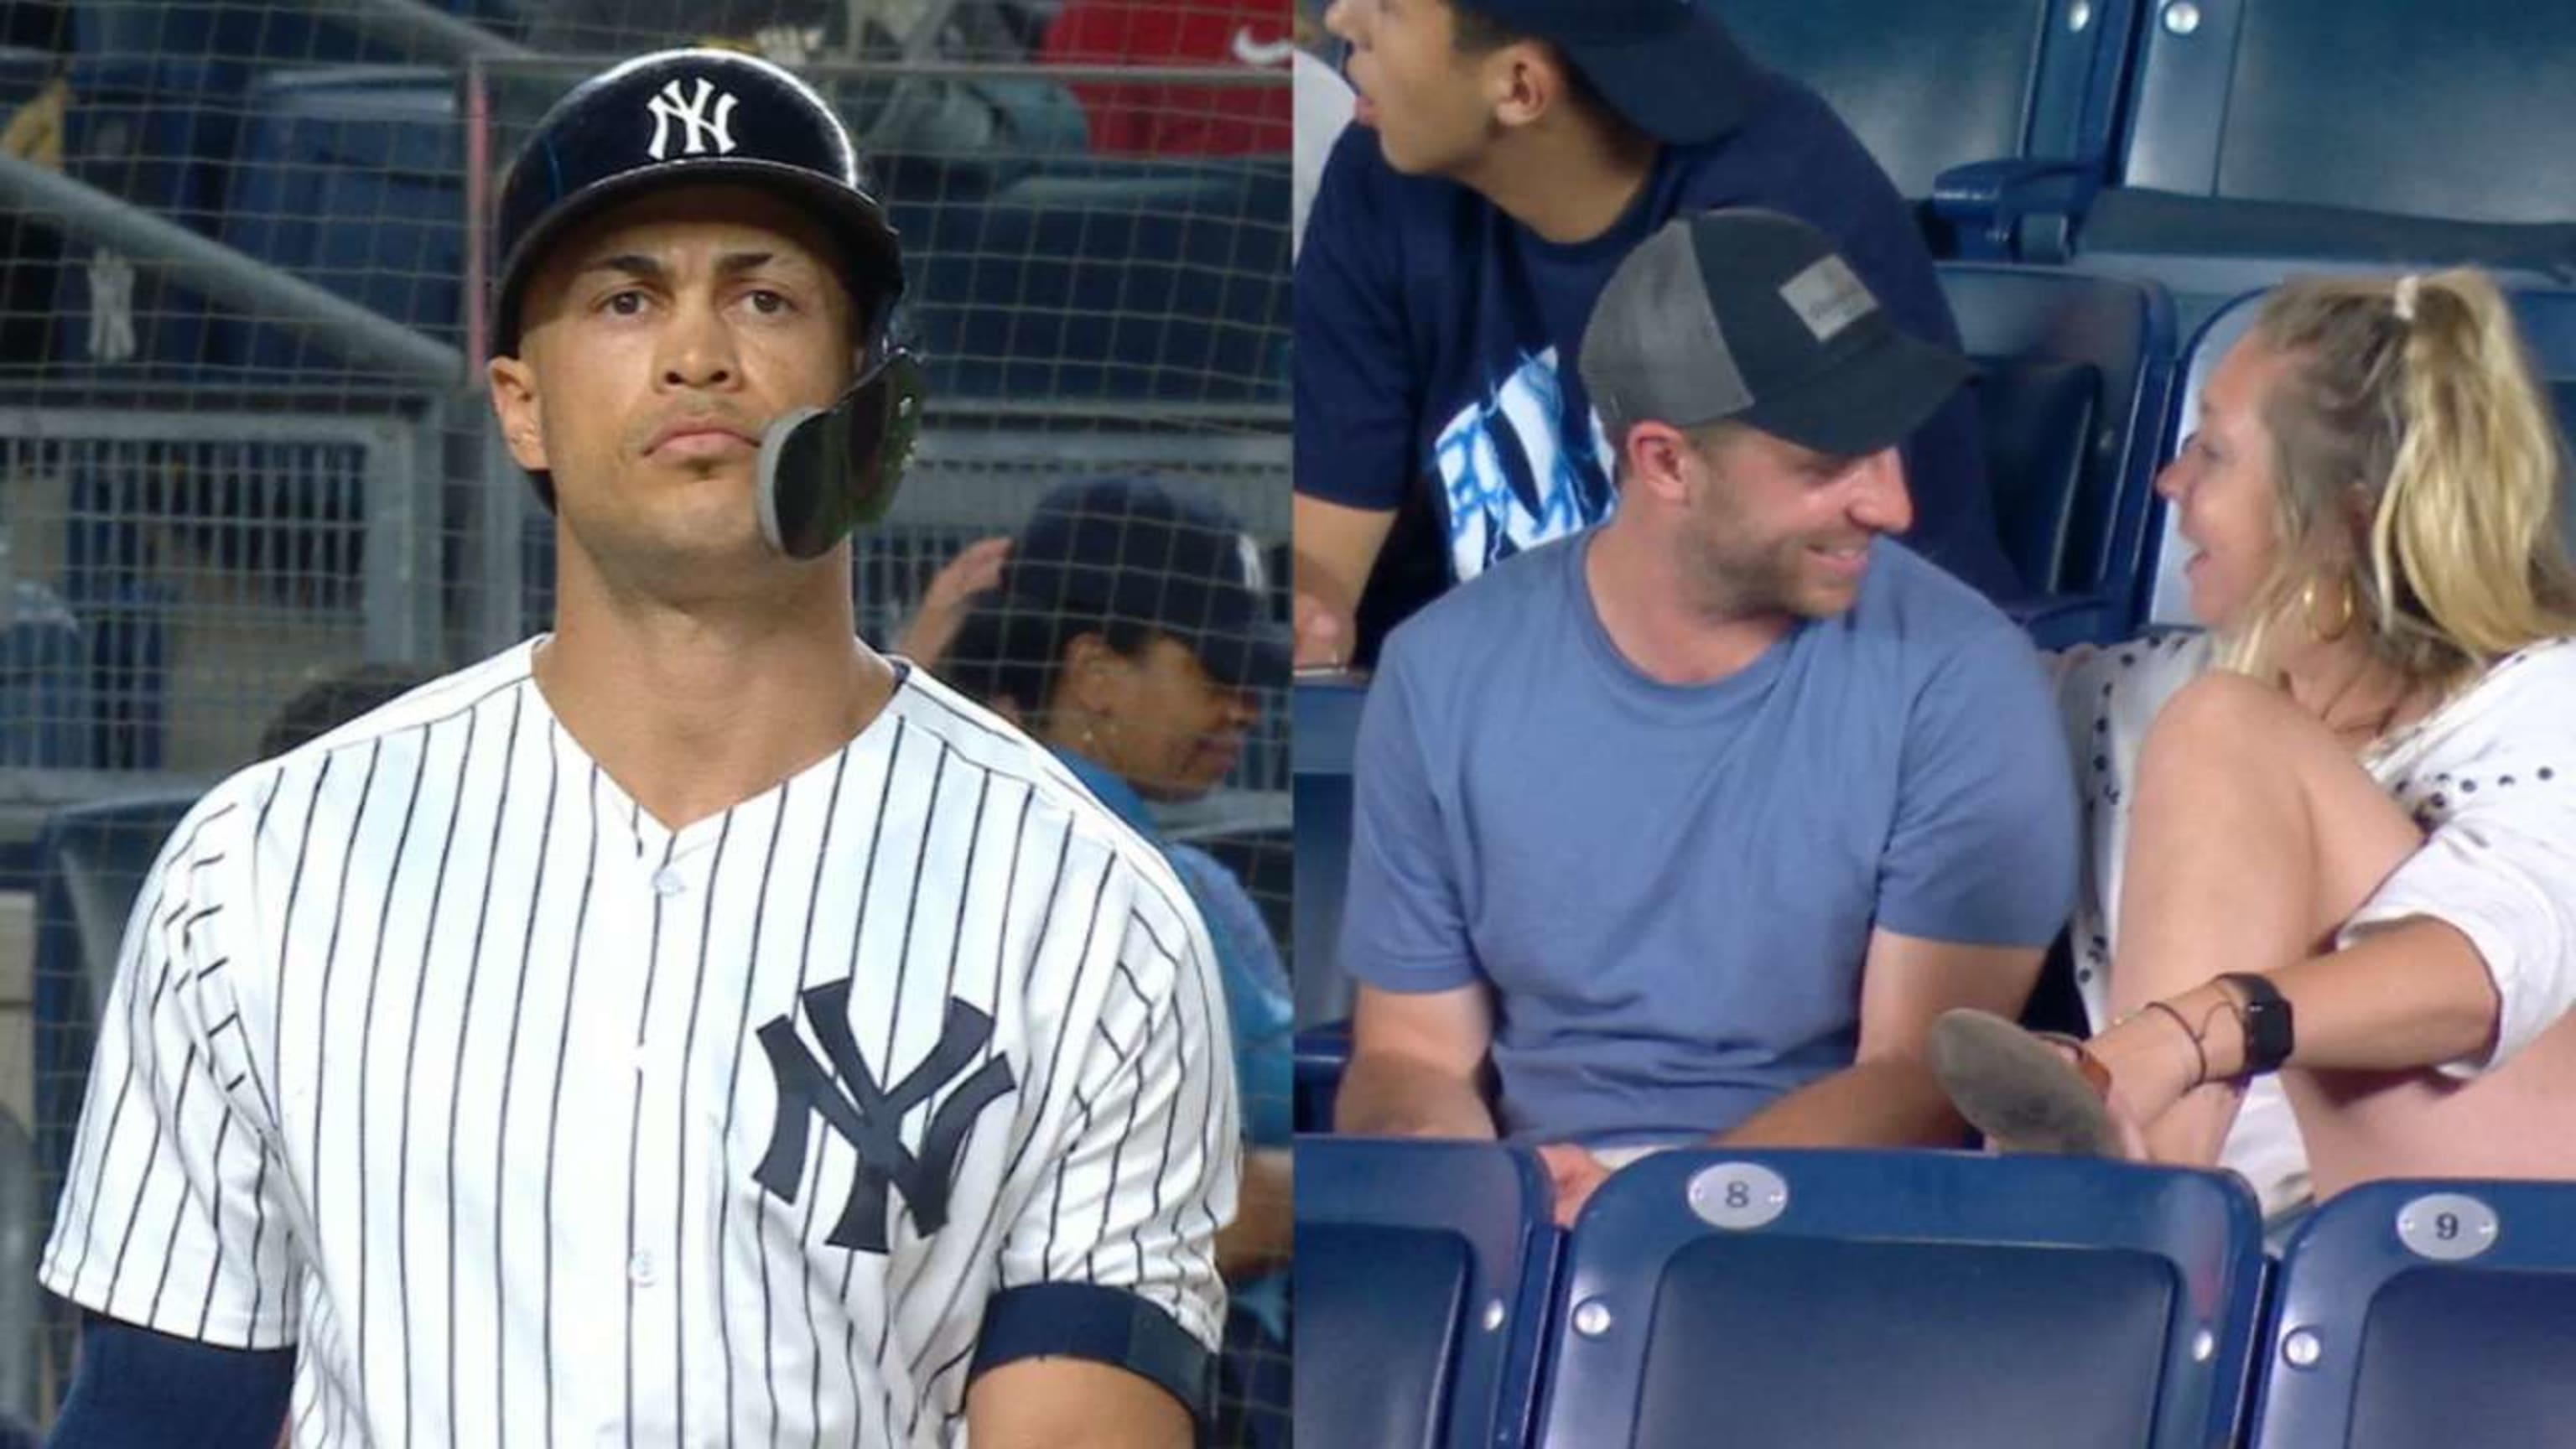 The fan who caught Giancarlo Stanton's 300th home run made